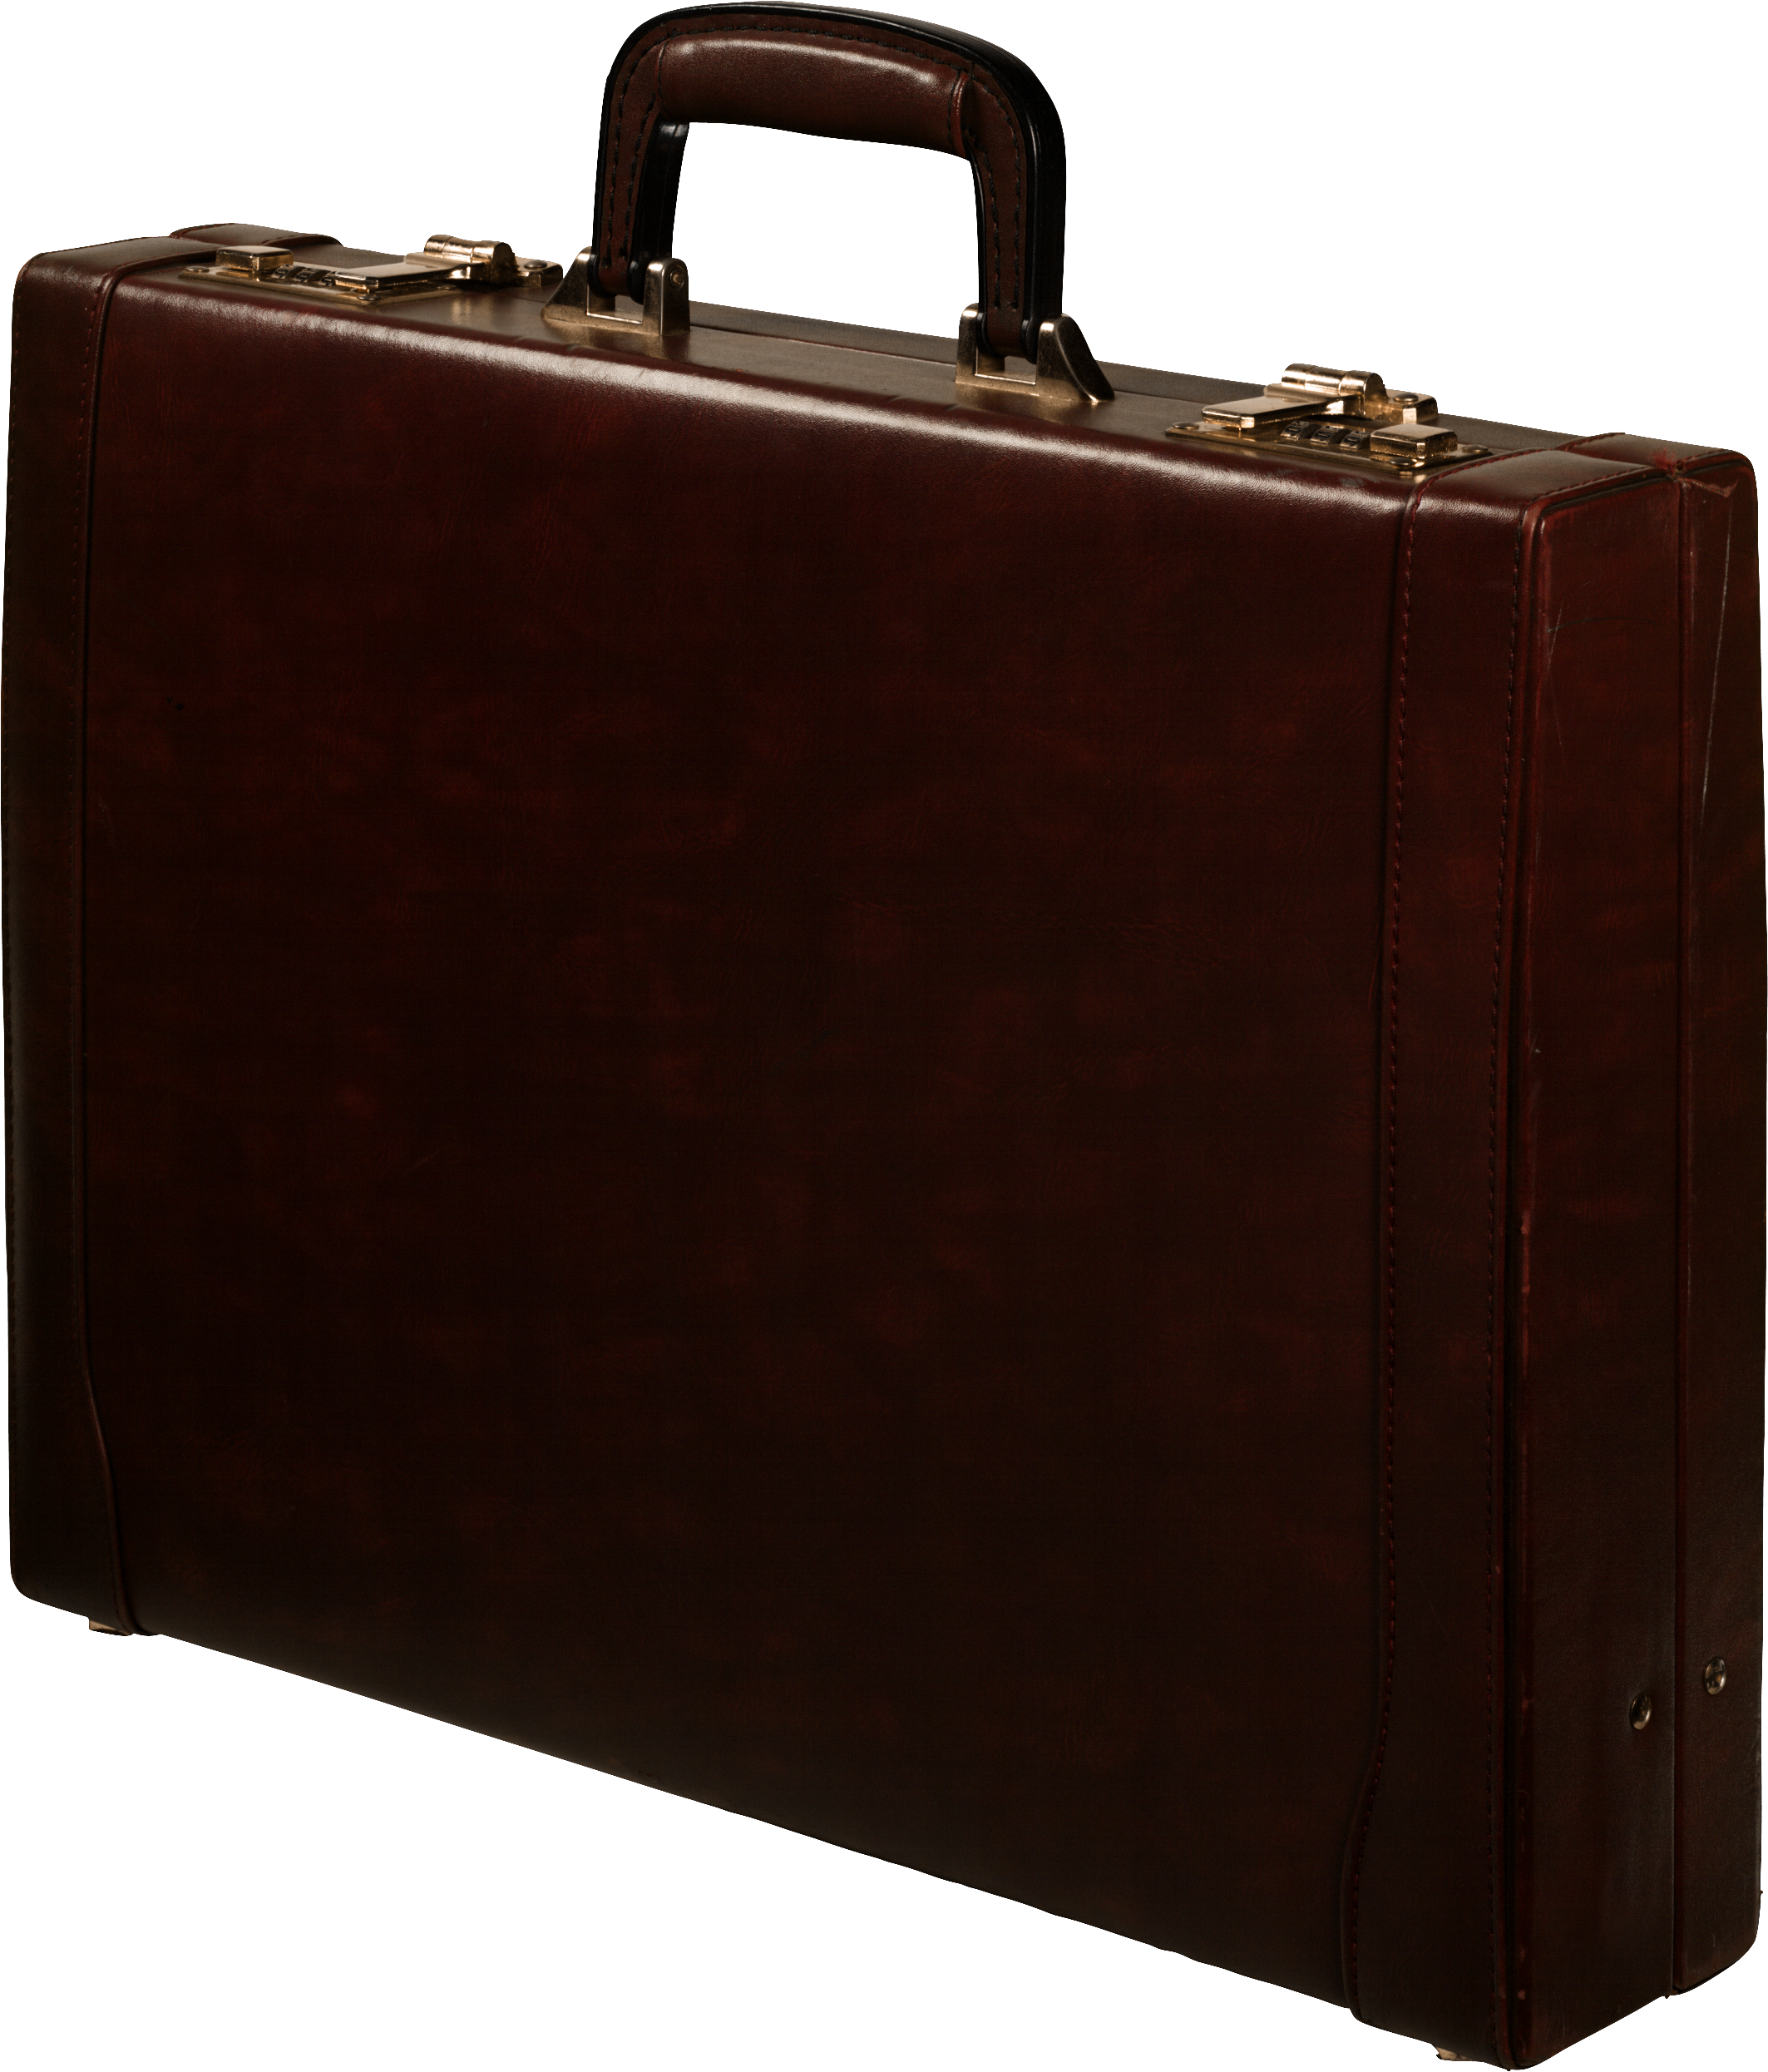 Suitcase PNG - 22507